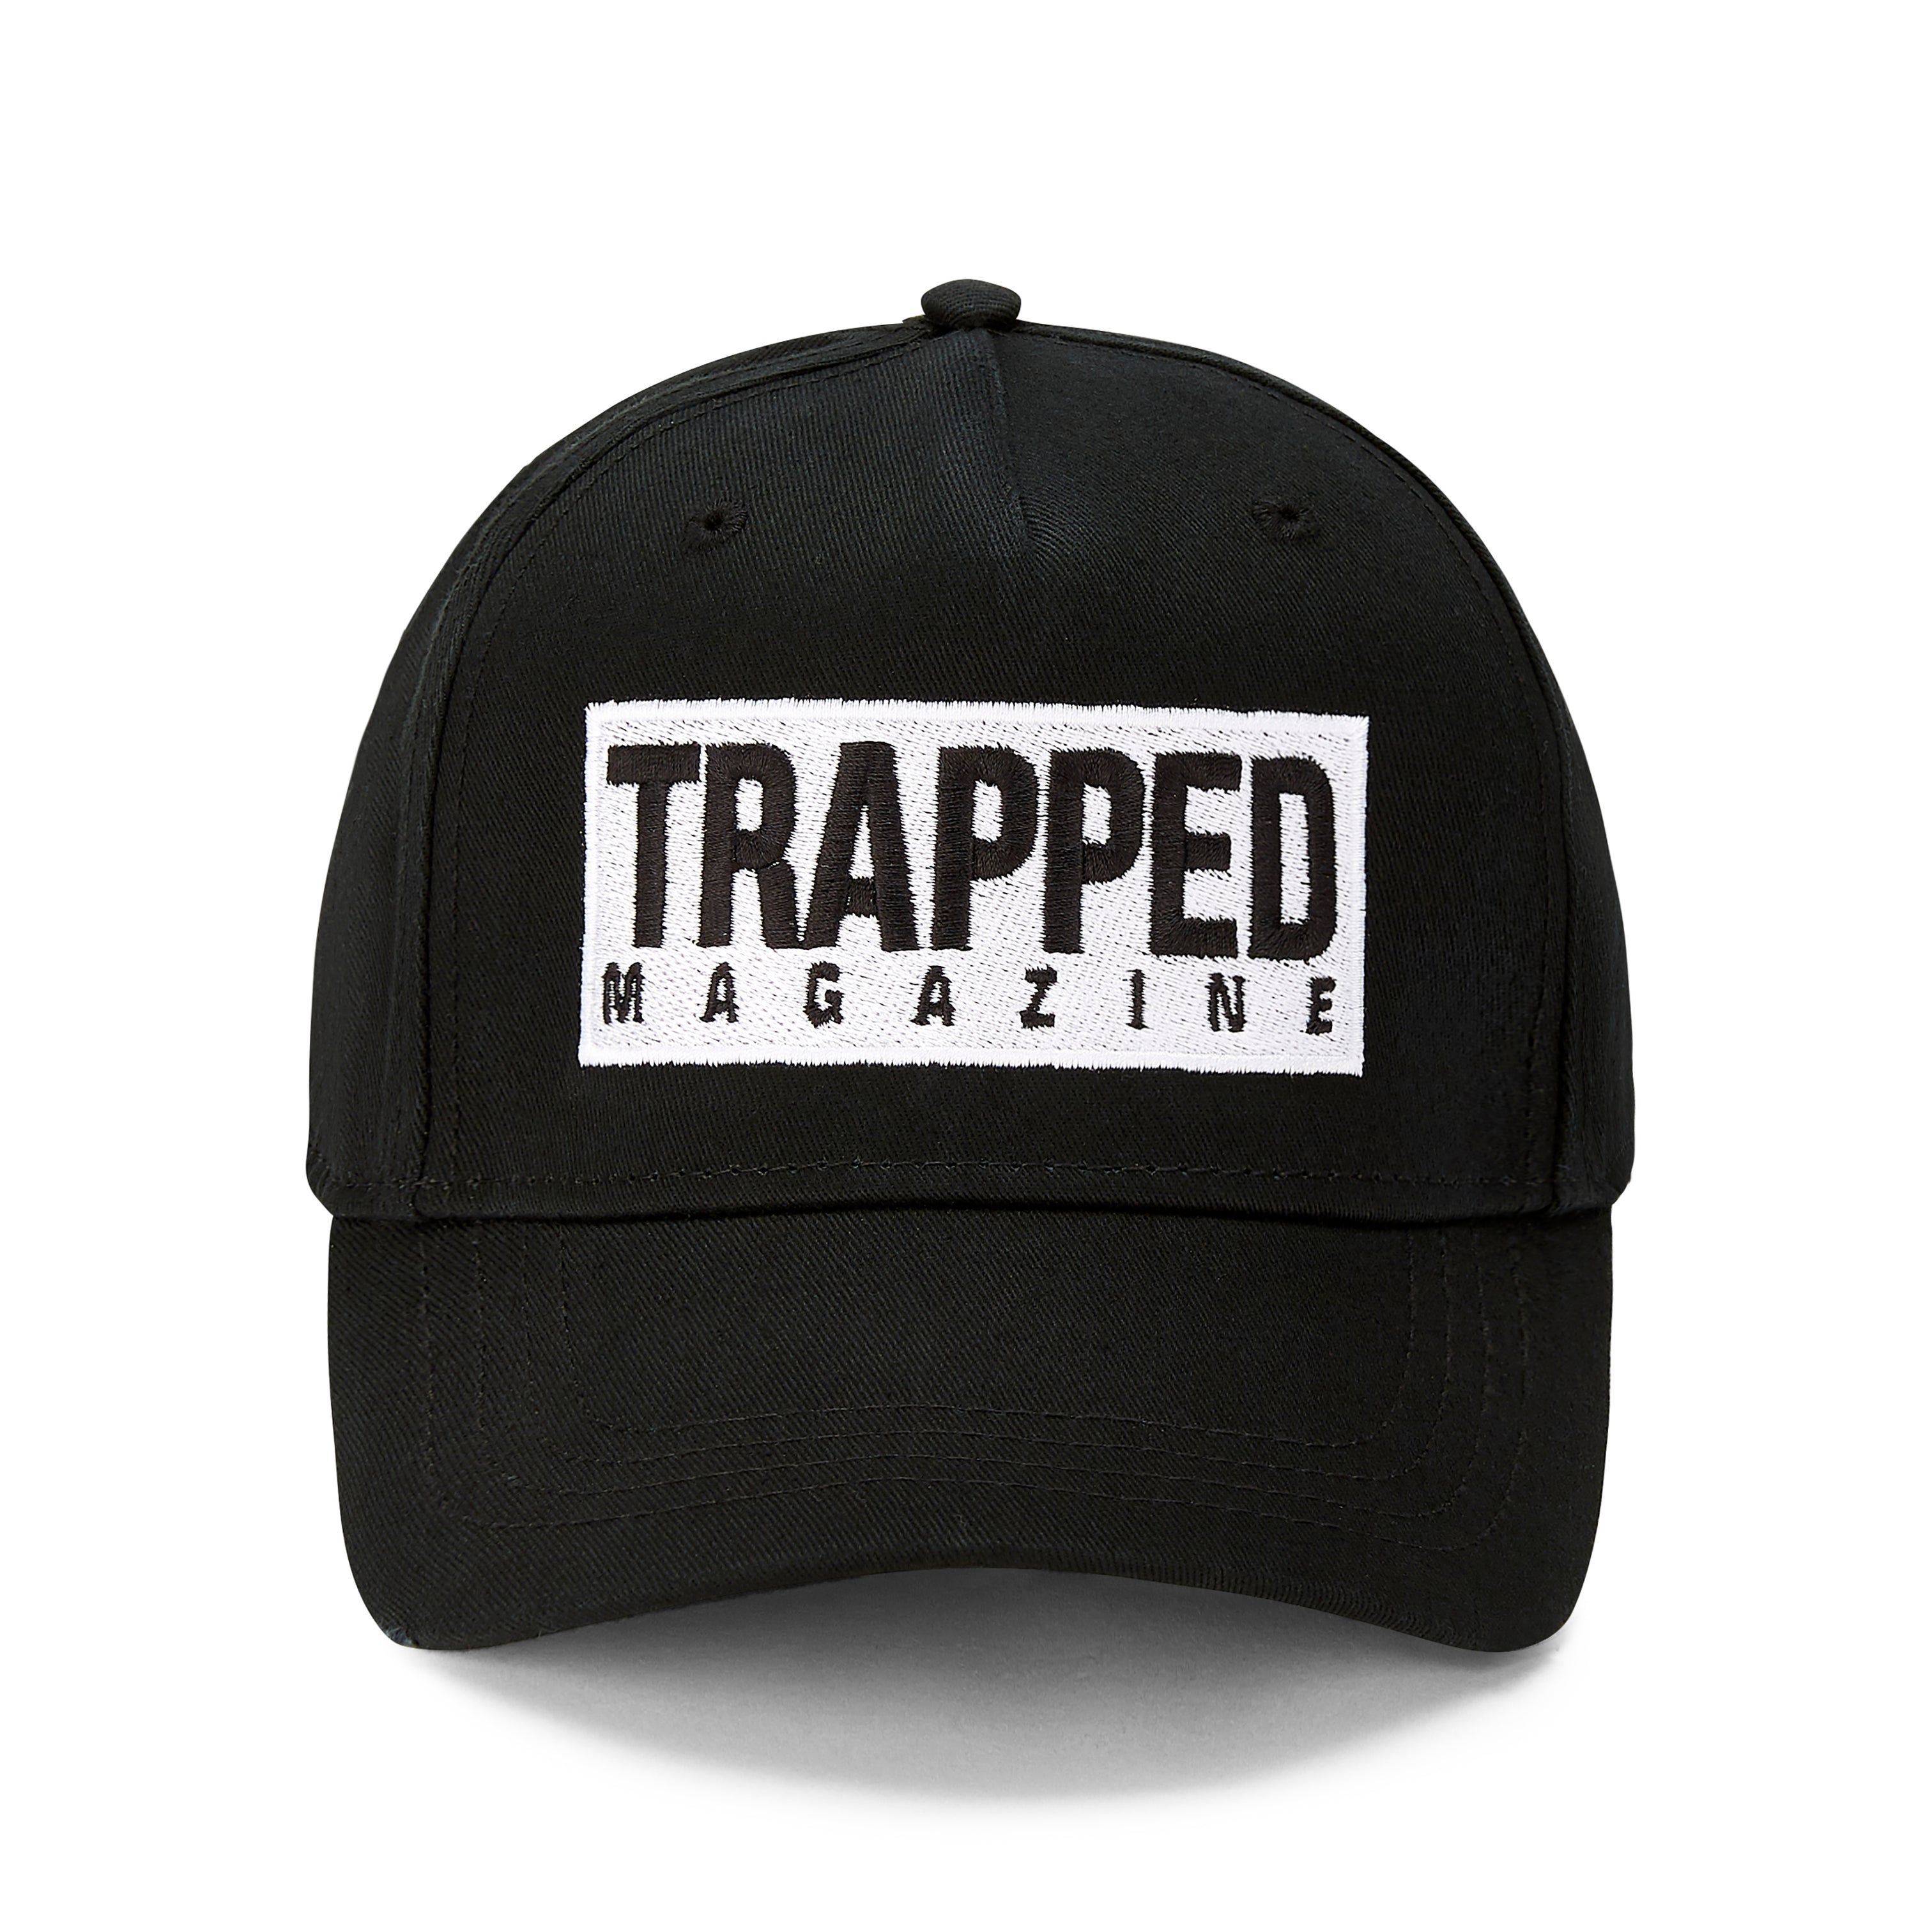 ACCESSORIES – Trapped Merch